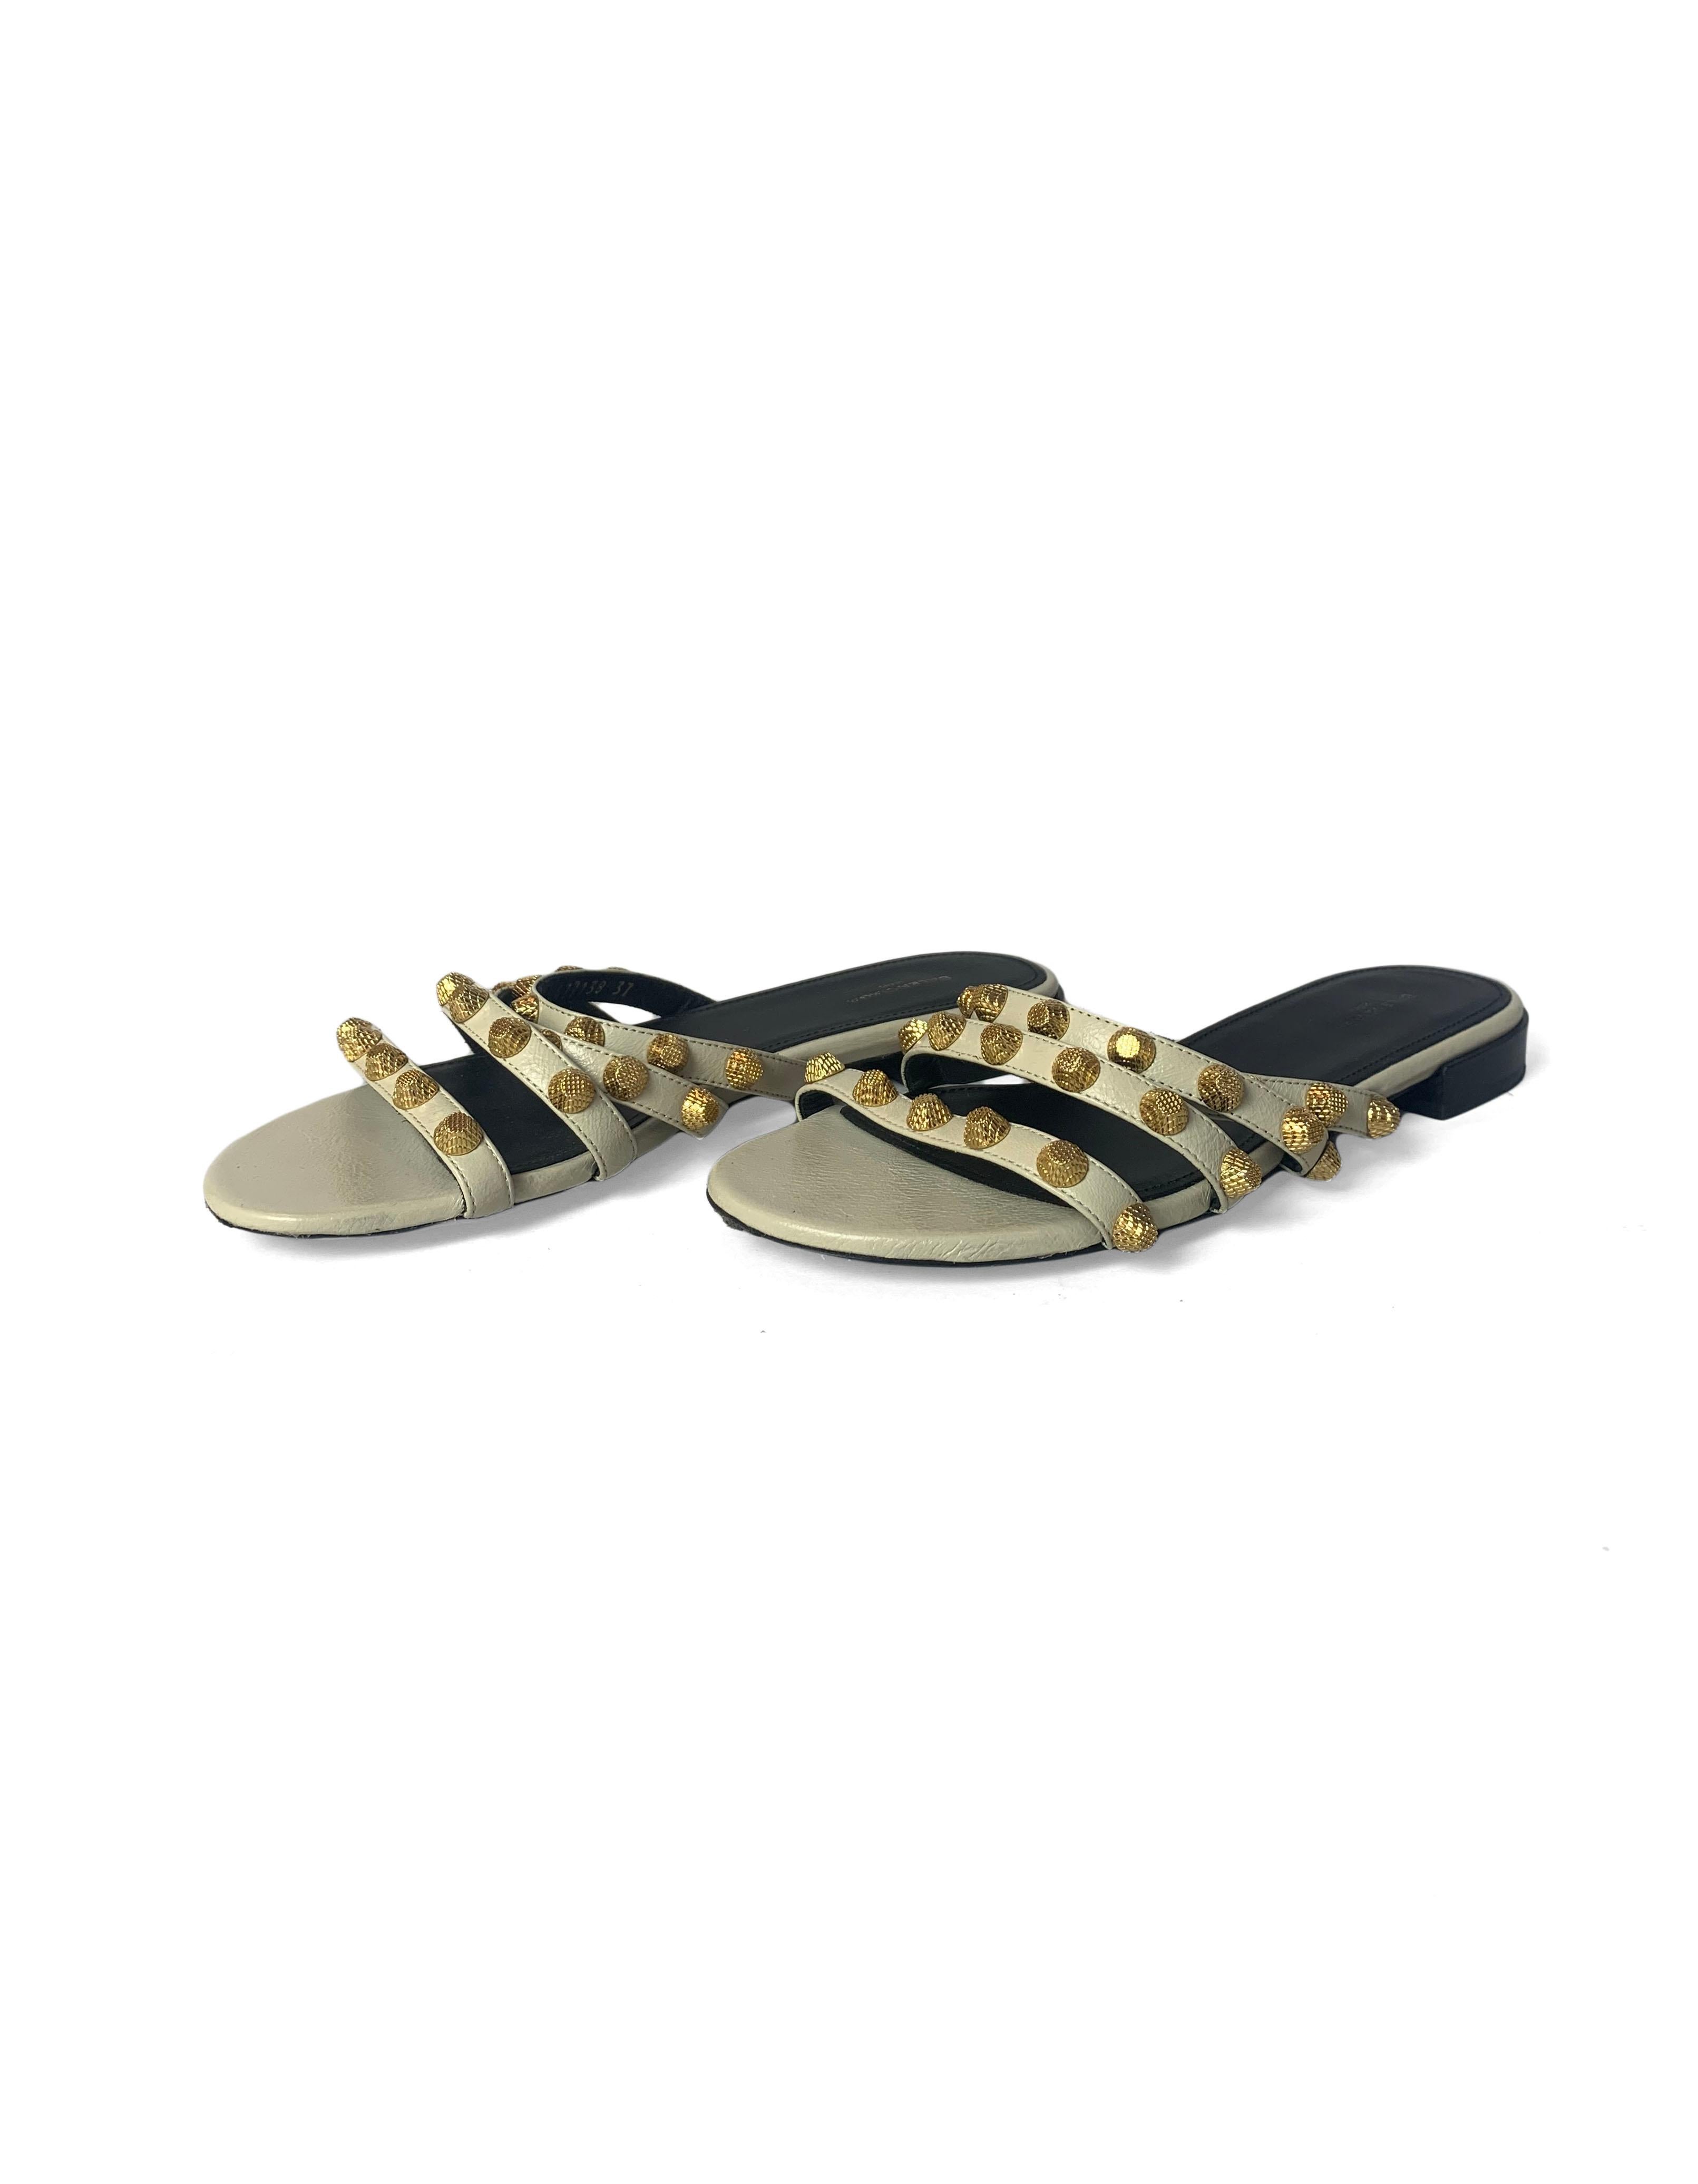 Balenciaga Beige Leather and Goldtone Studded Slide Sandals sz 37

Made In: Italy
Color: Beige and gold
Hardware: Goldtone
Materials: Leather and metal
Closure/Opening: Slip on
Overall Condition: Excellent pre-owned condition with the exception of